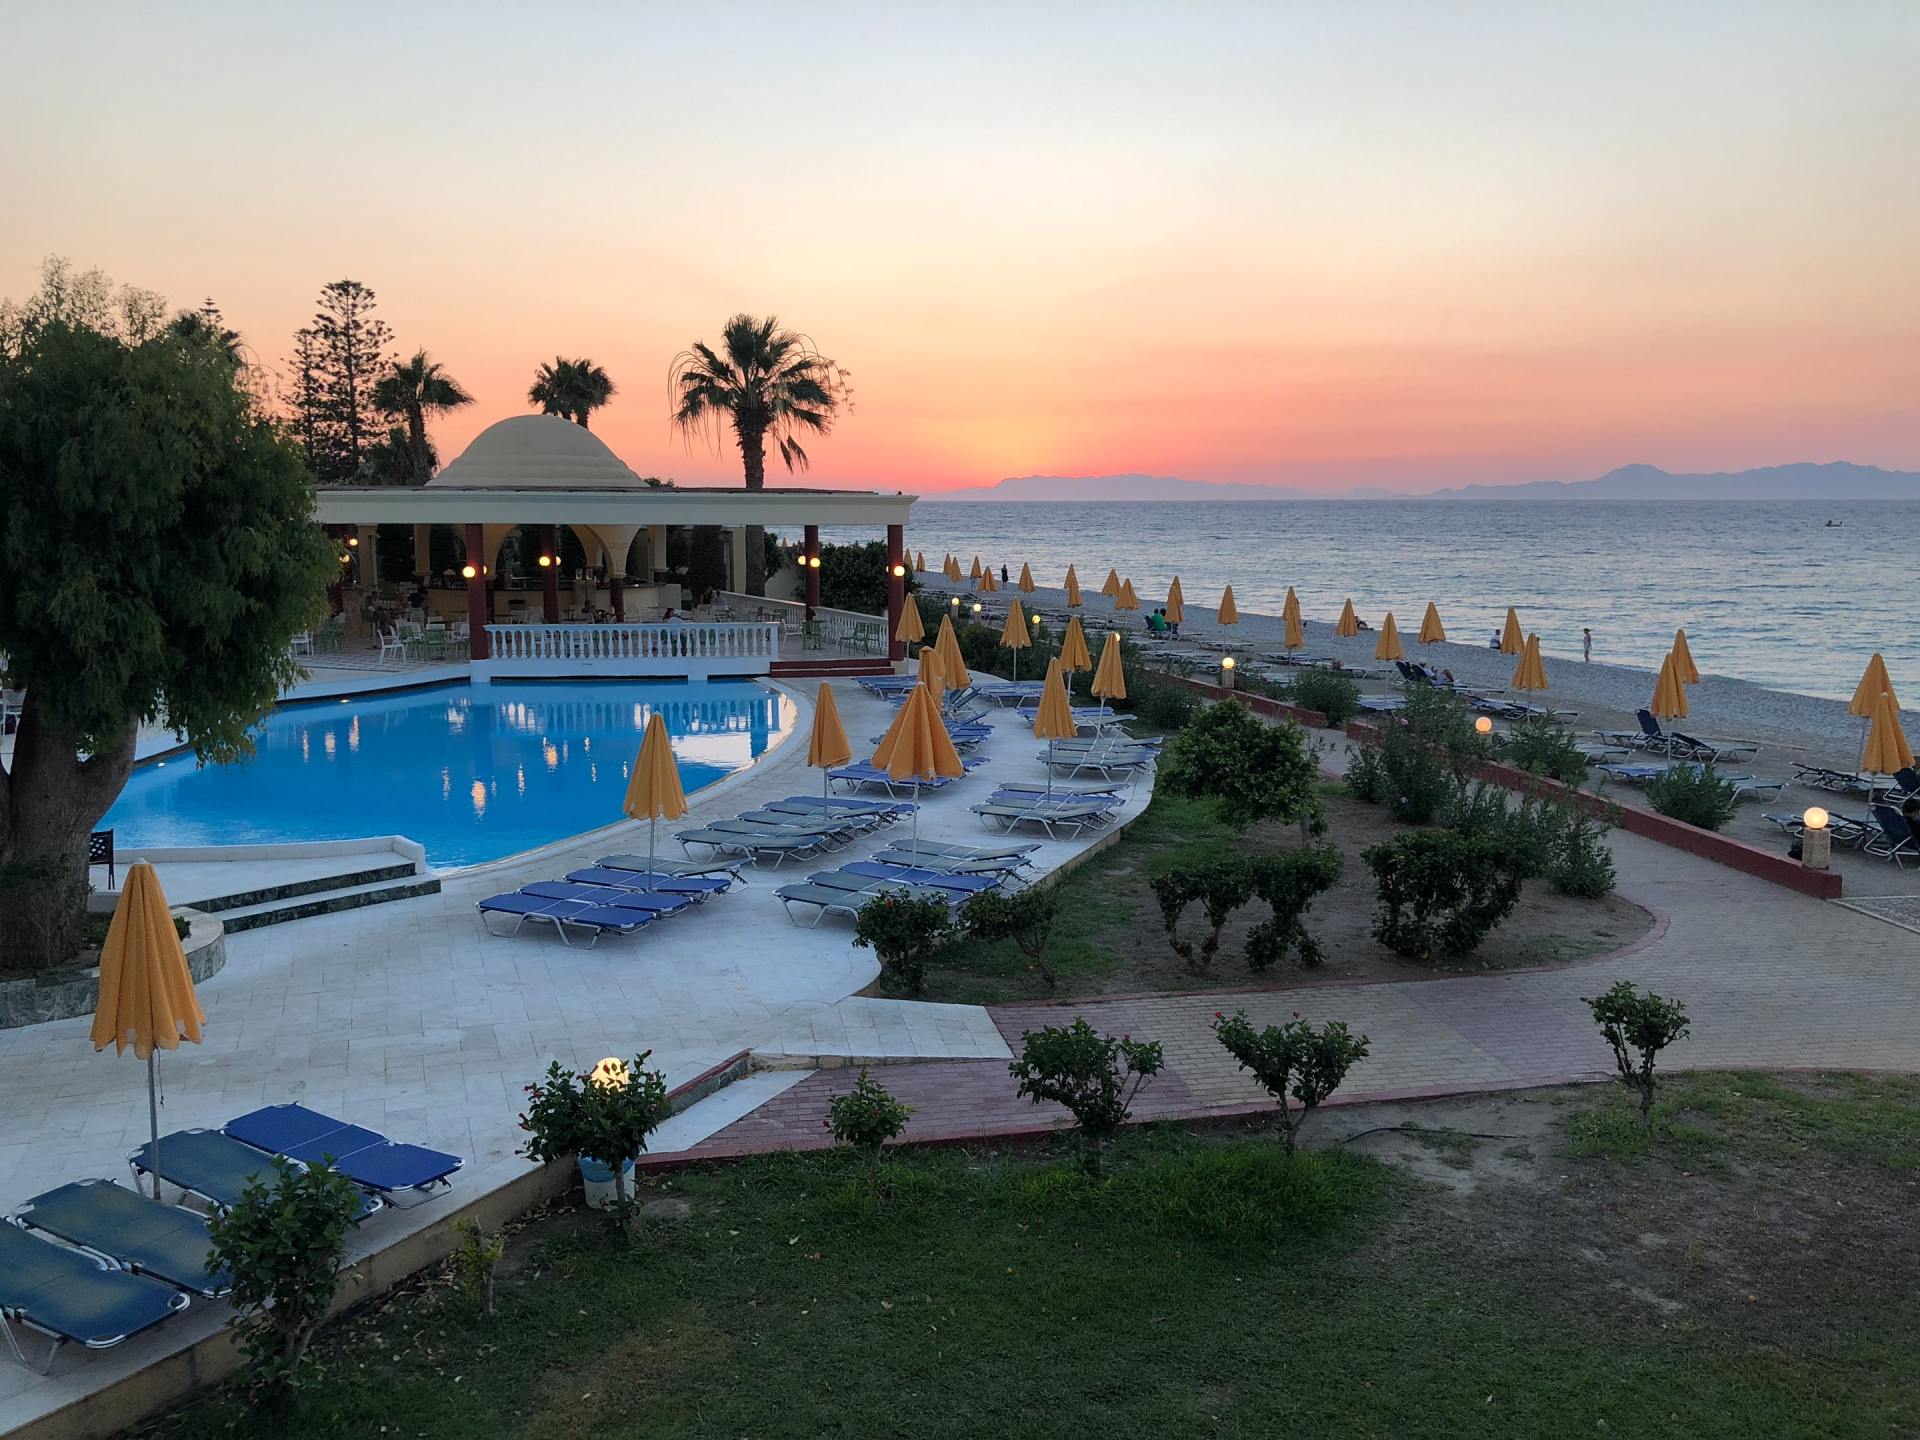 A large swimming pool surrounded by chairs and umbrellas with a sunset in the background,  life coach training, the coaching guild